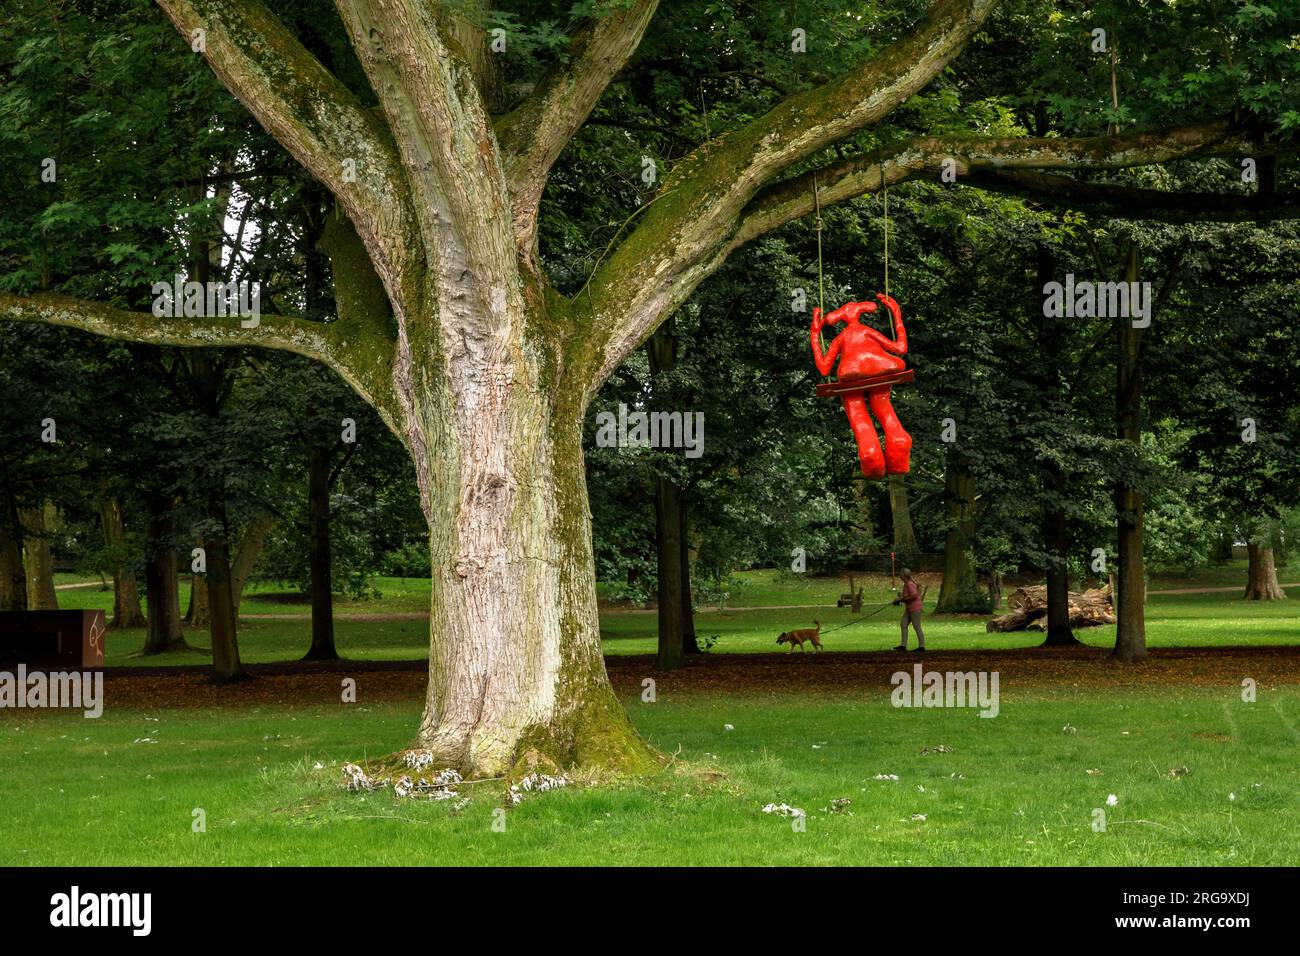 the Stammheim castle park in the district of Stammheim, public green area in which modern art is exhibited, Cologne, Germany. "Emily" by Steff Adams. Stock Photo